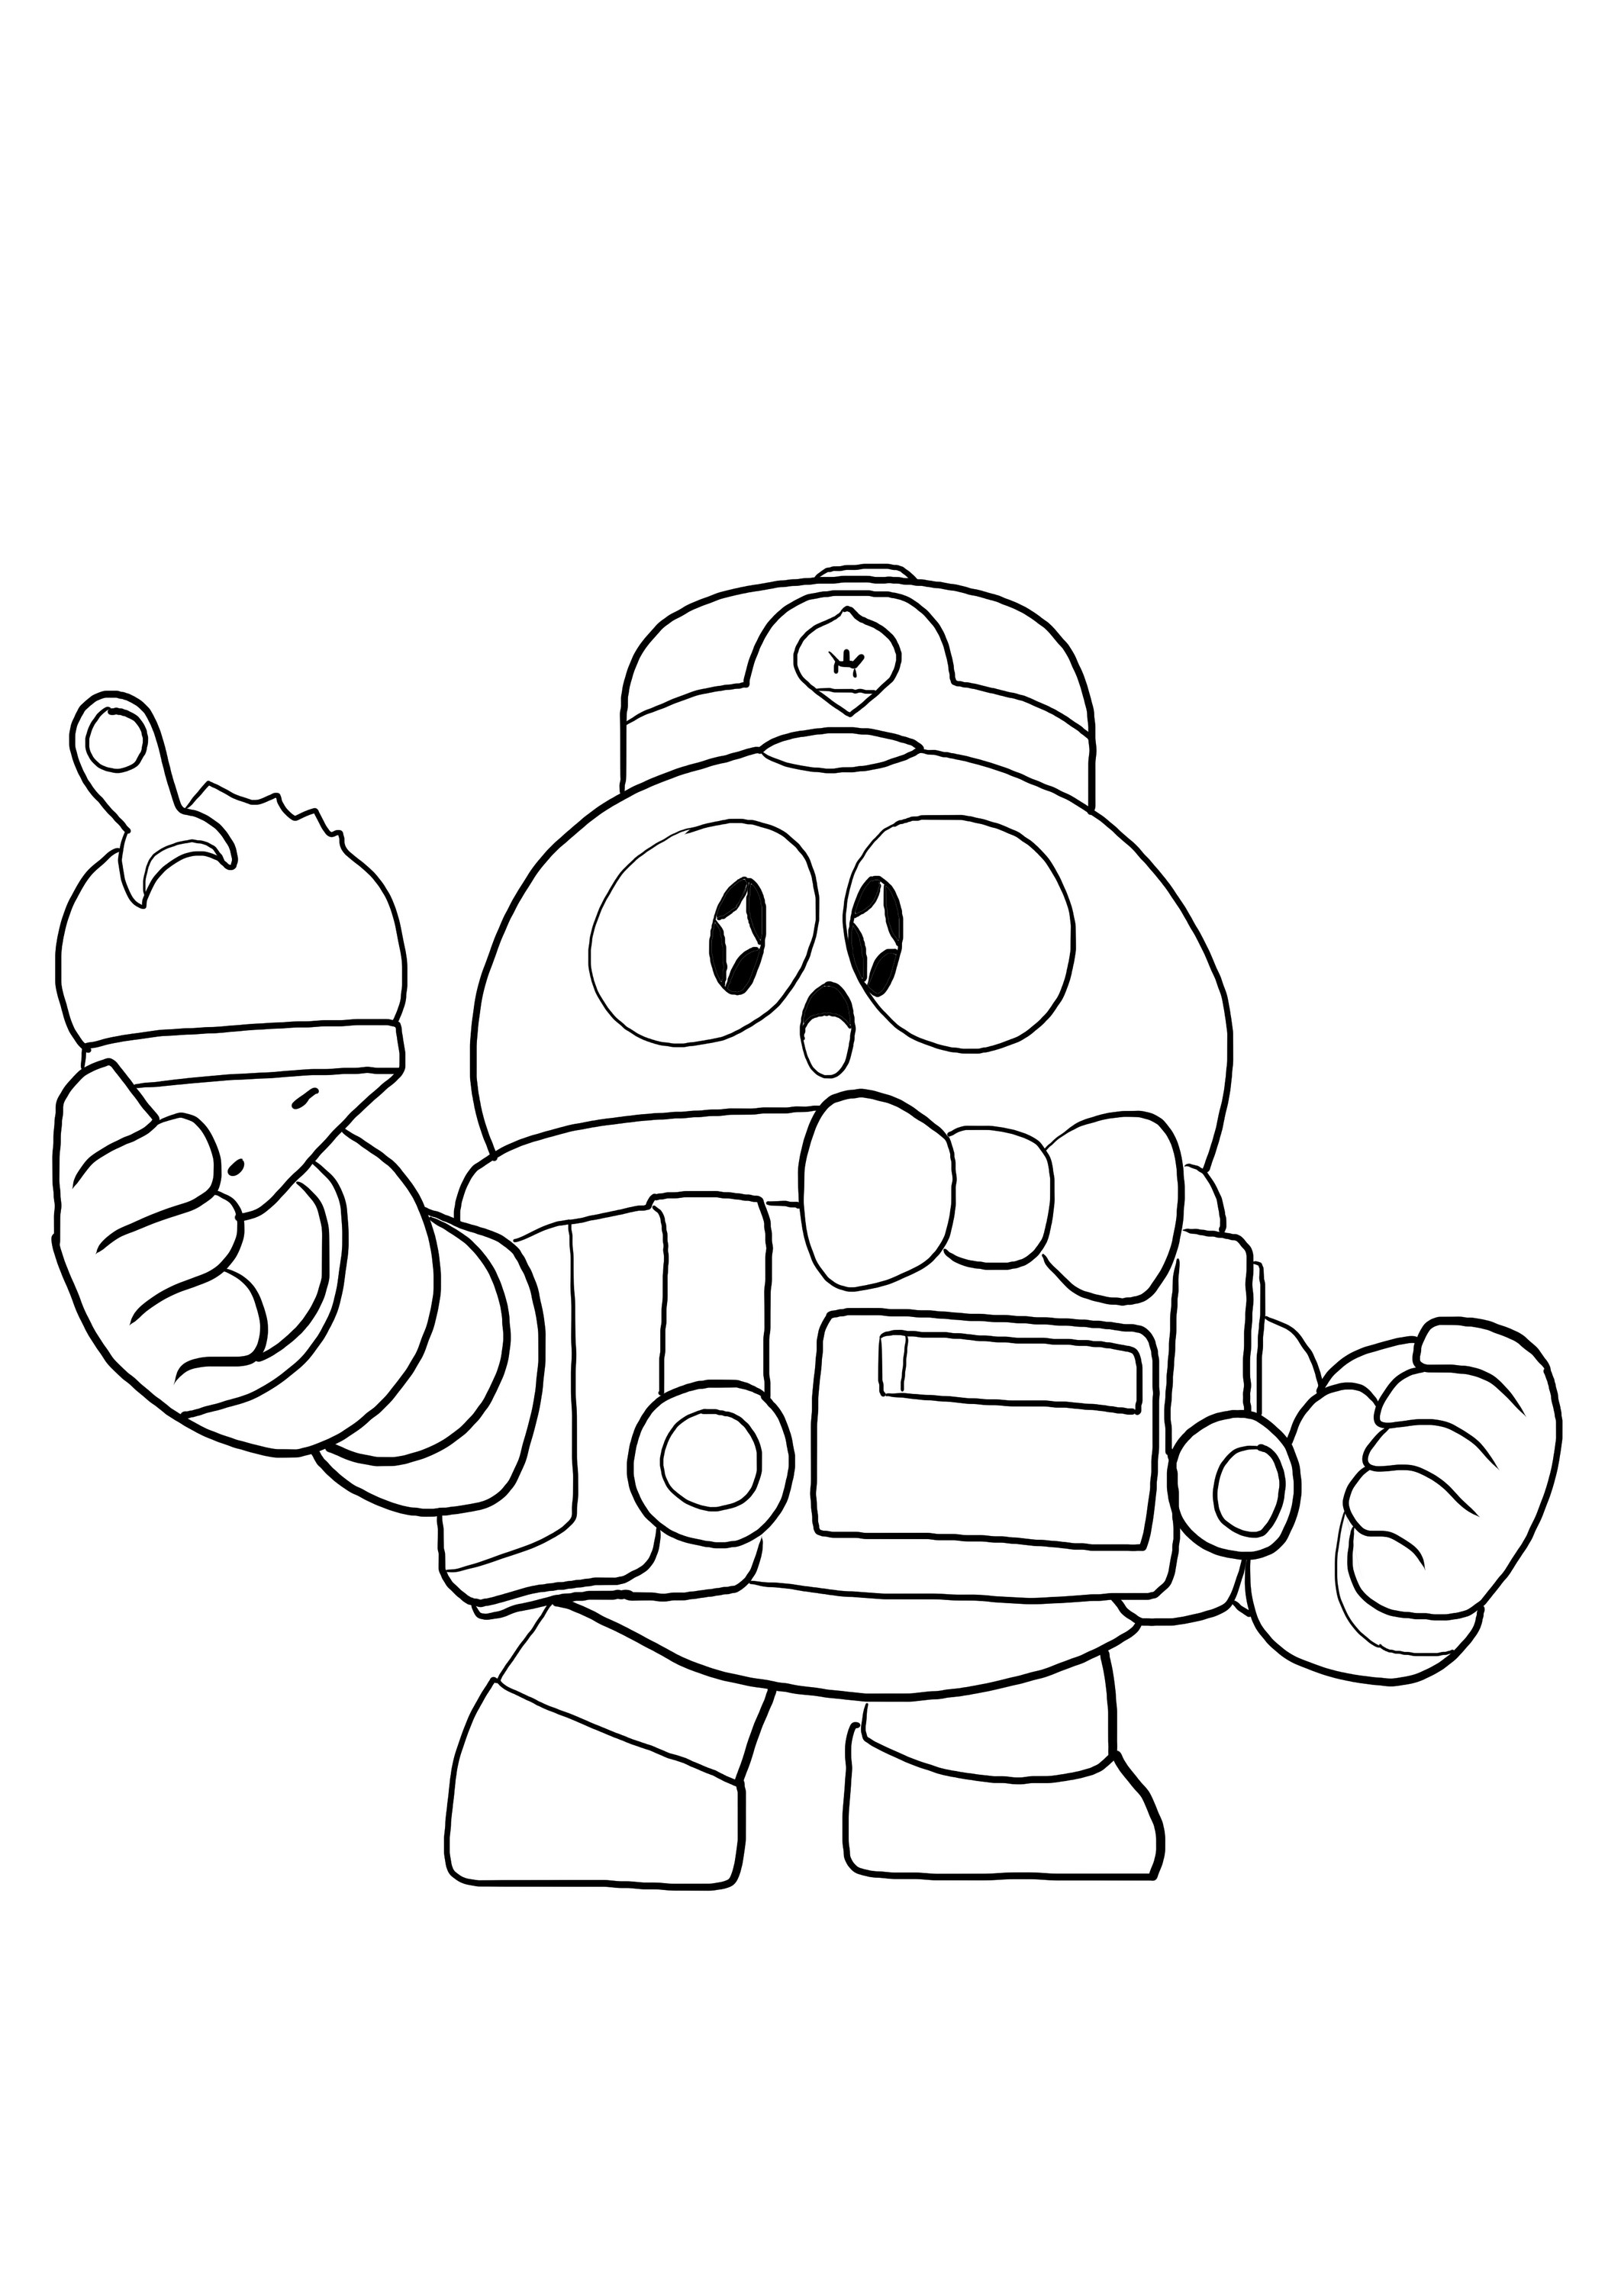 Lou From Brawl Stars Coloring Page - coloring brawl stars lou